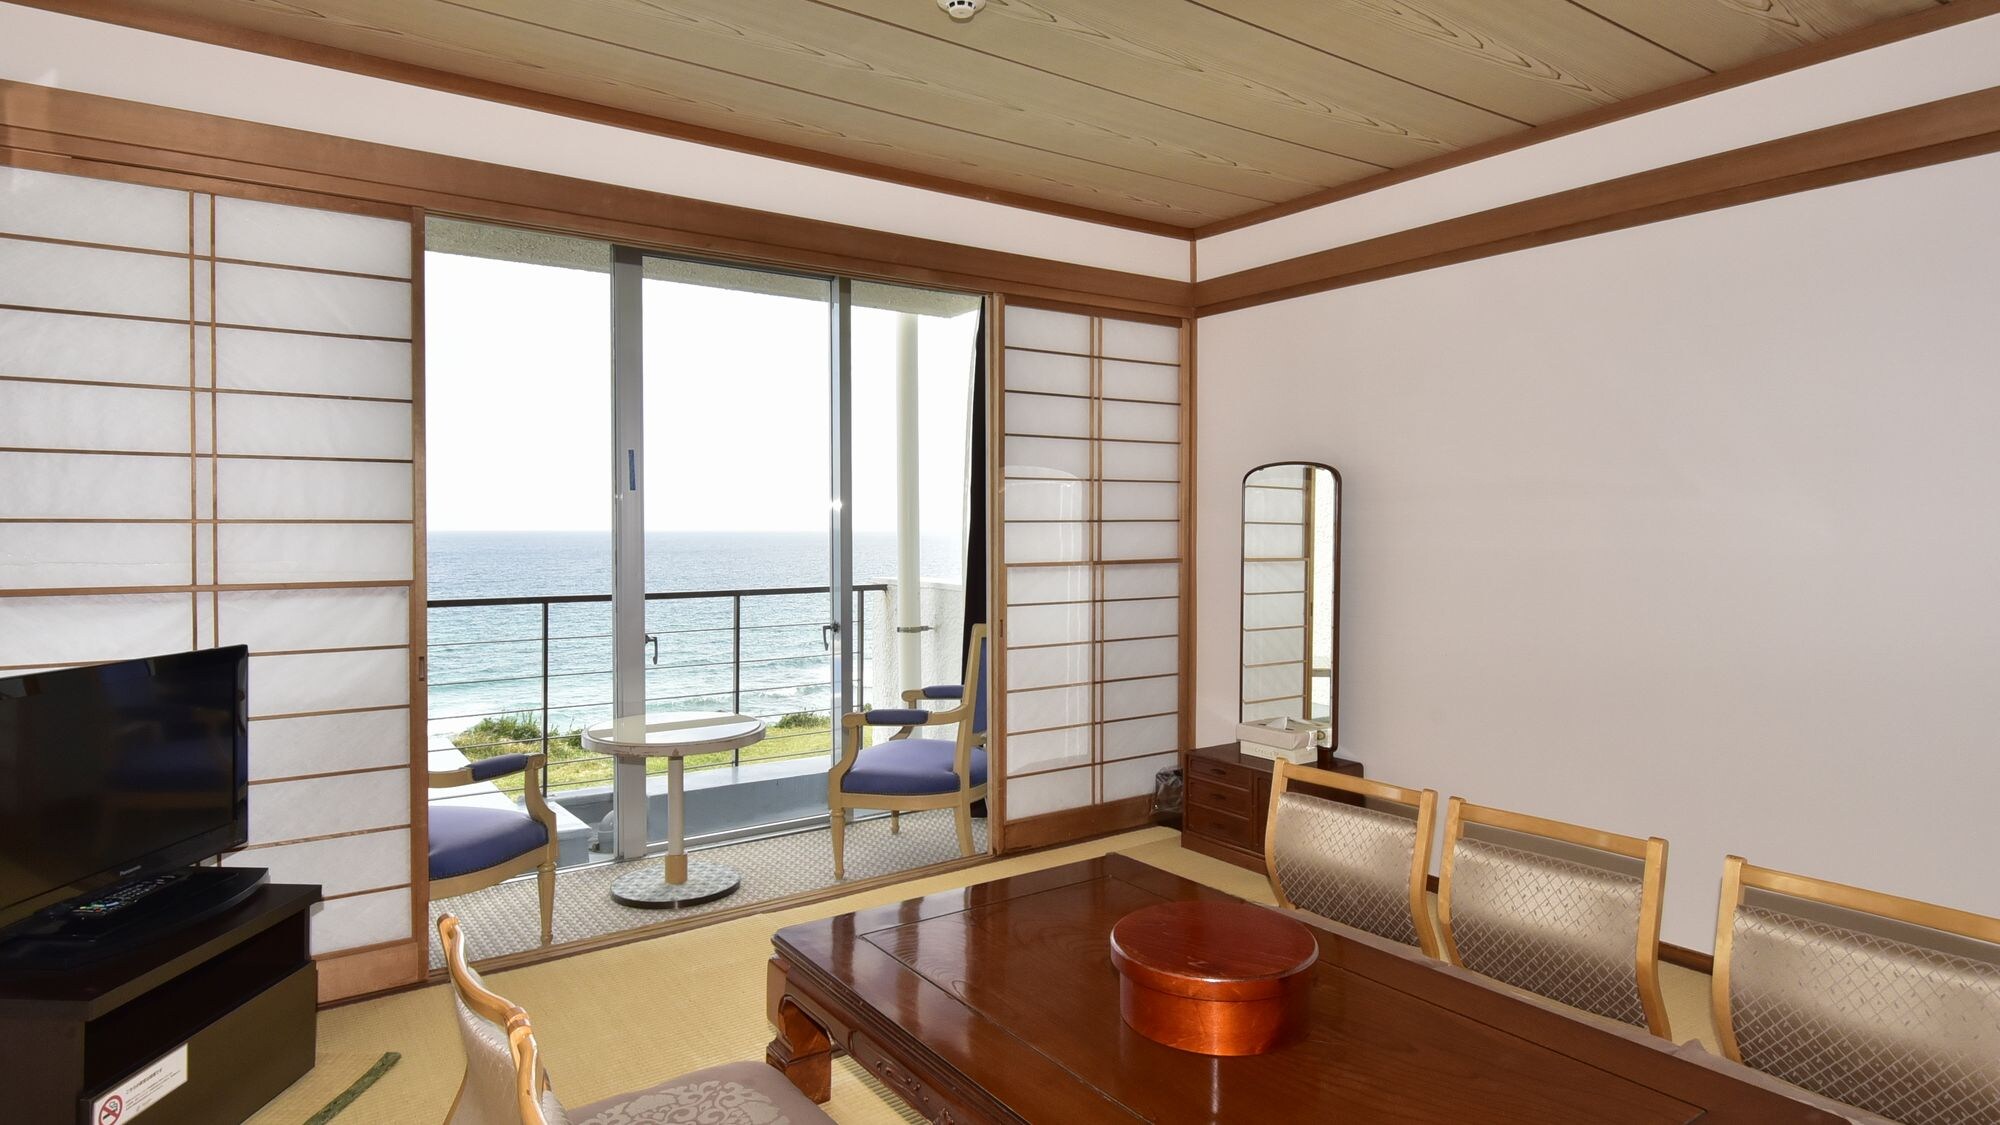 Ocean view, Japanese-style room A (48.8 square meters)